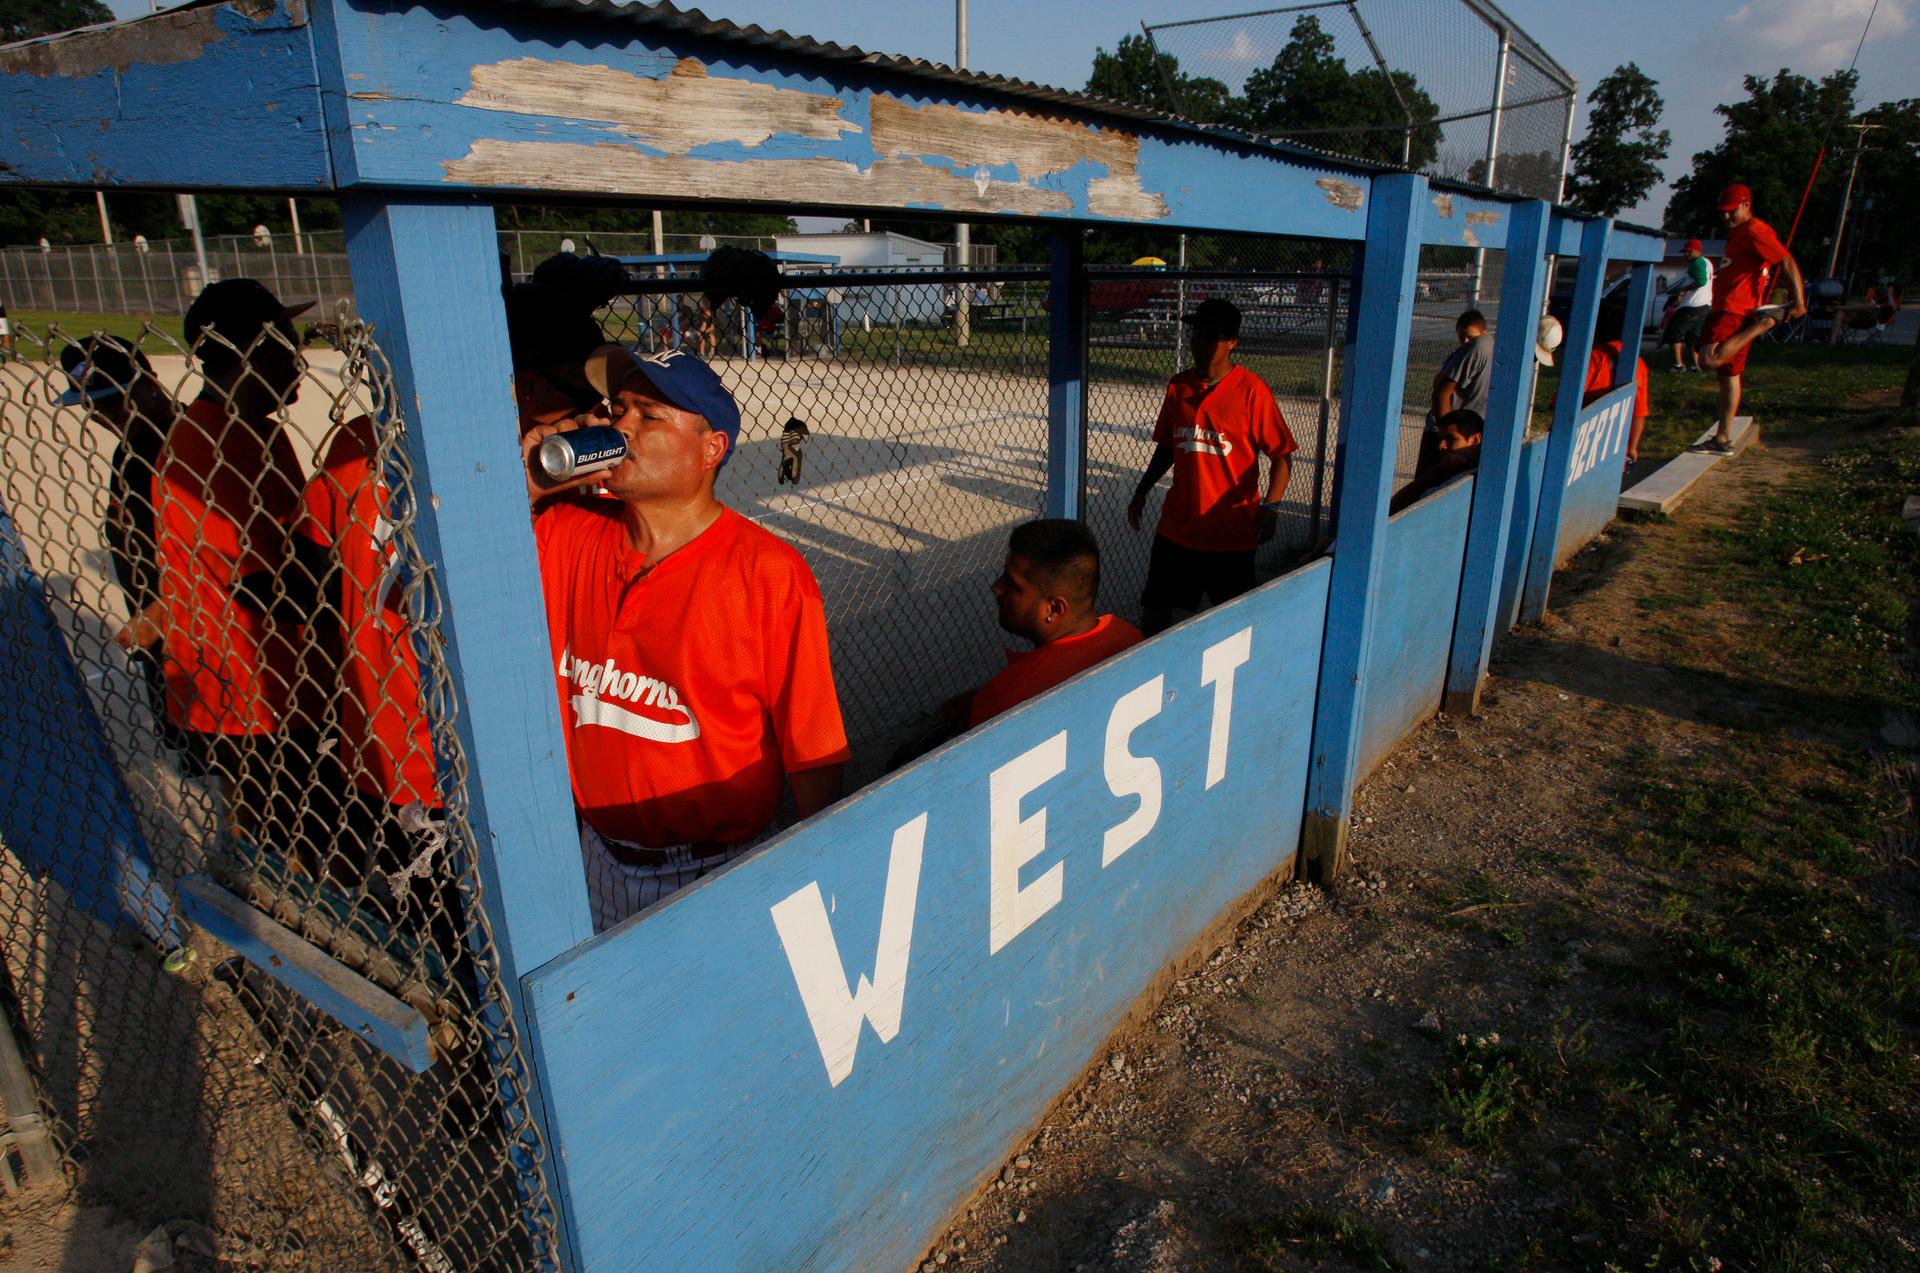 Members of the Longhorns compete in a Friday night softball game in West Liberty, Iowa